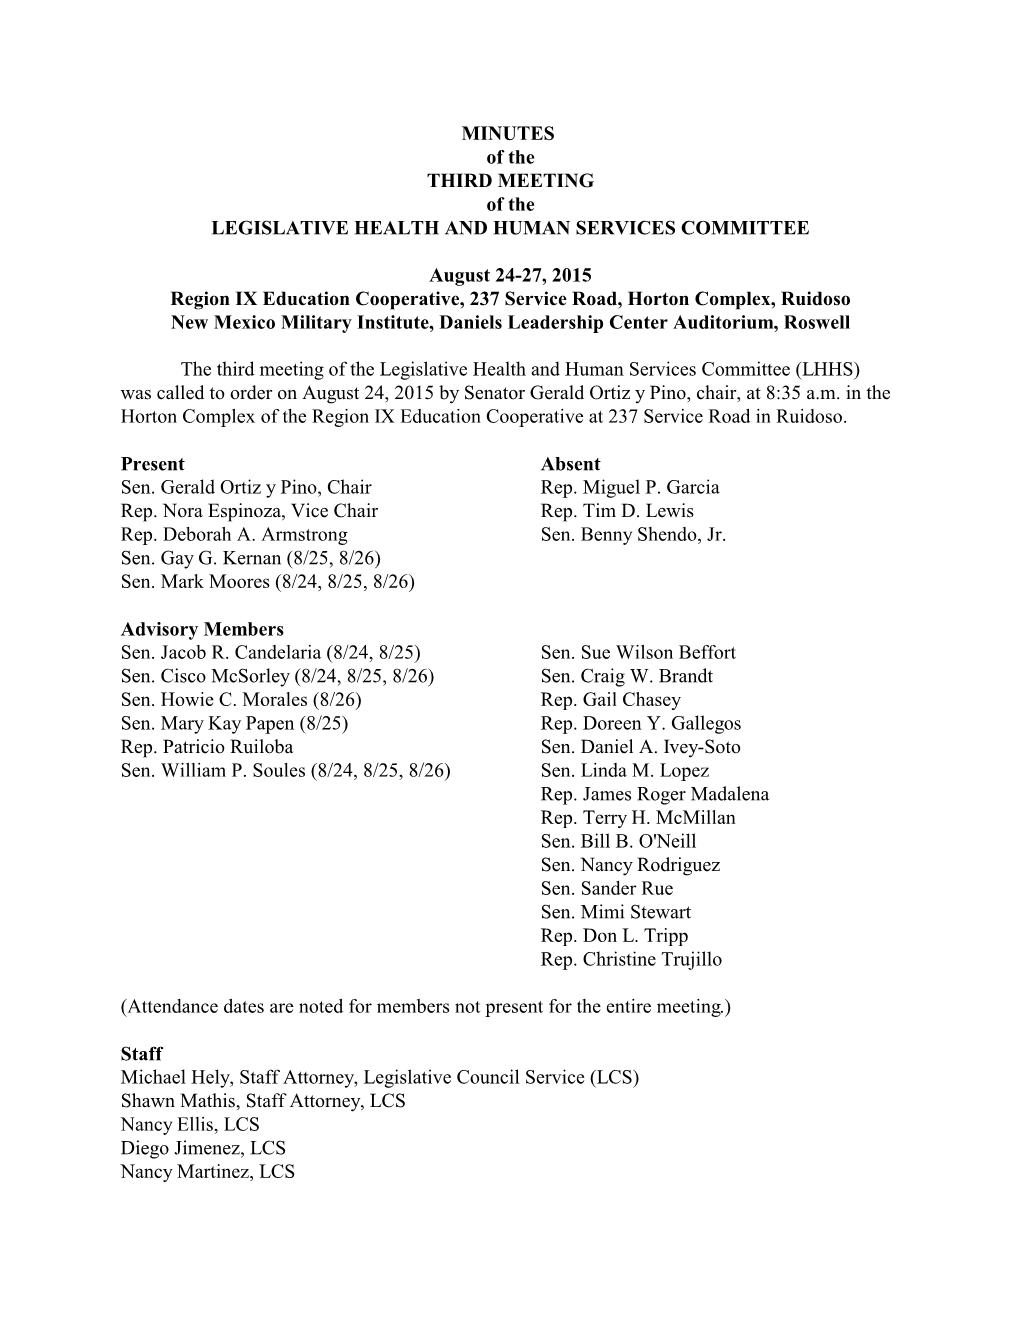 MINUTES of the THIRD MEETING of the LEGISLATIVE HEALTH and HUMAN SERVICES COMMITTEE August 24-27, 2015 Region IX Education Coope